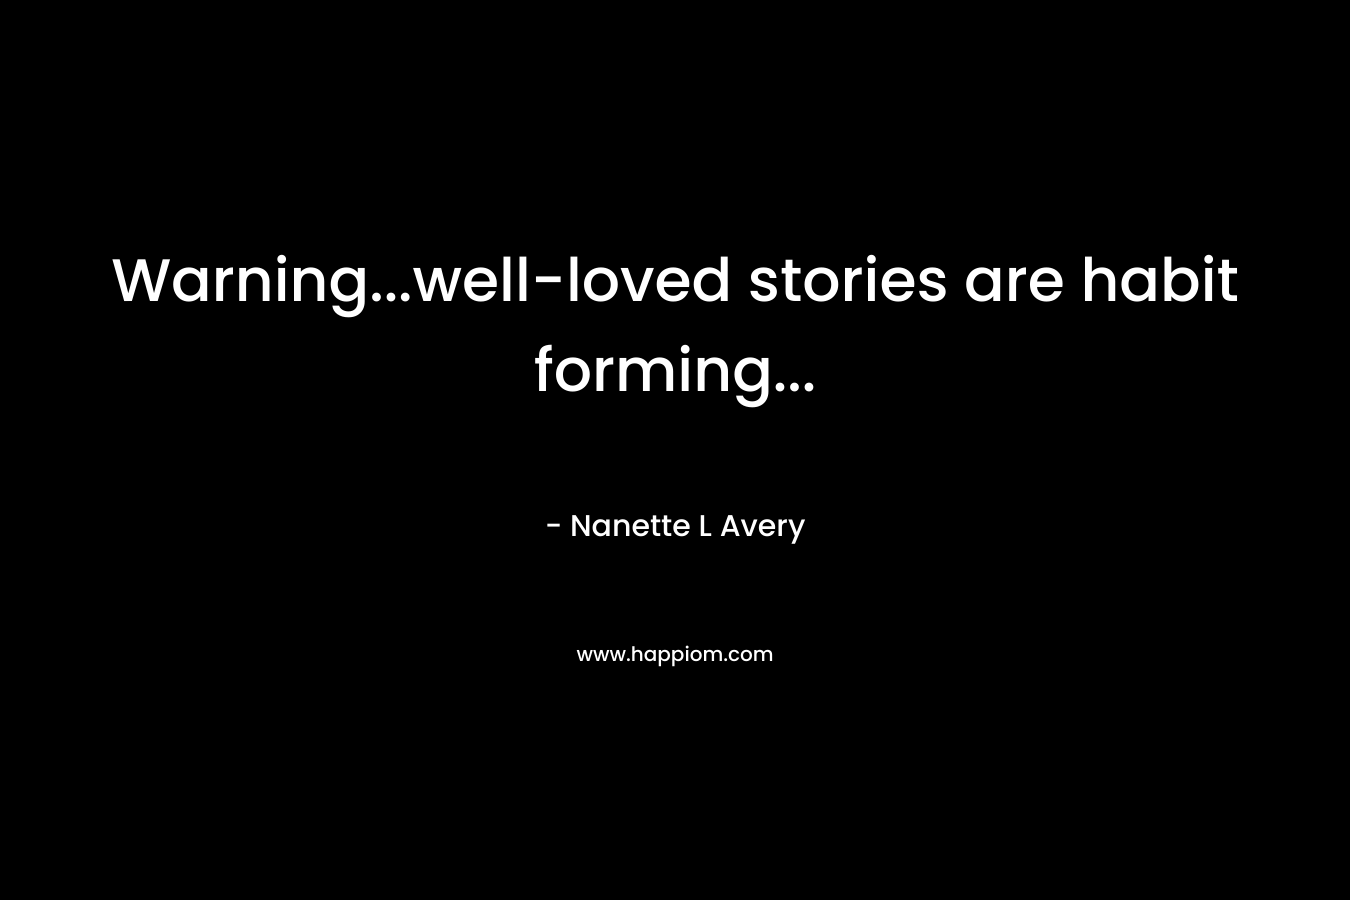 Warning...well-loved stories are habit forming...